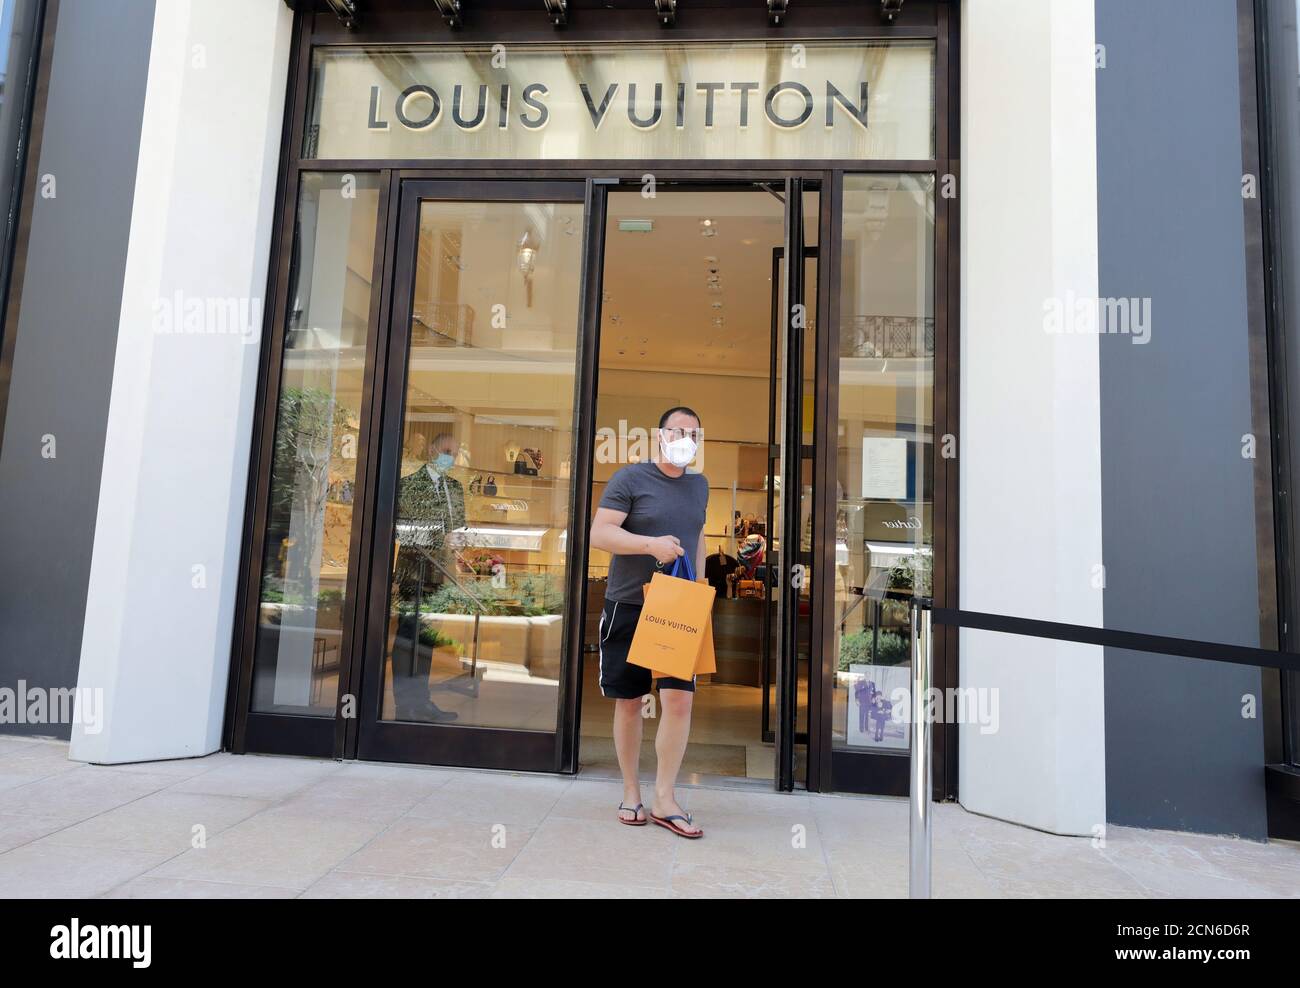 A wearing a protective face mask, leaves a Louis Vuitton shop in Monte Carlo after lockdown restrictions were partially lifted the coronavirus disease (COVID-19) outbreak in Monaco, May 7, 2020.